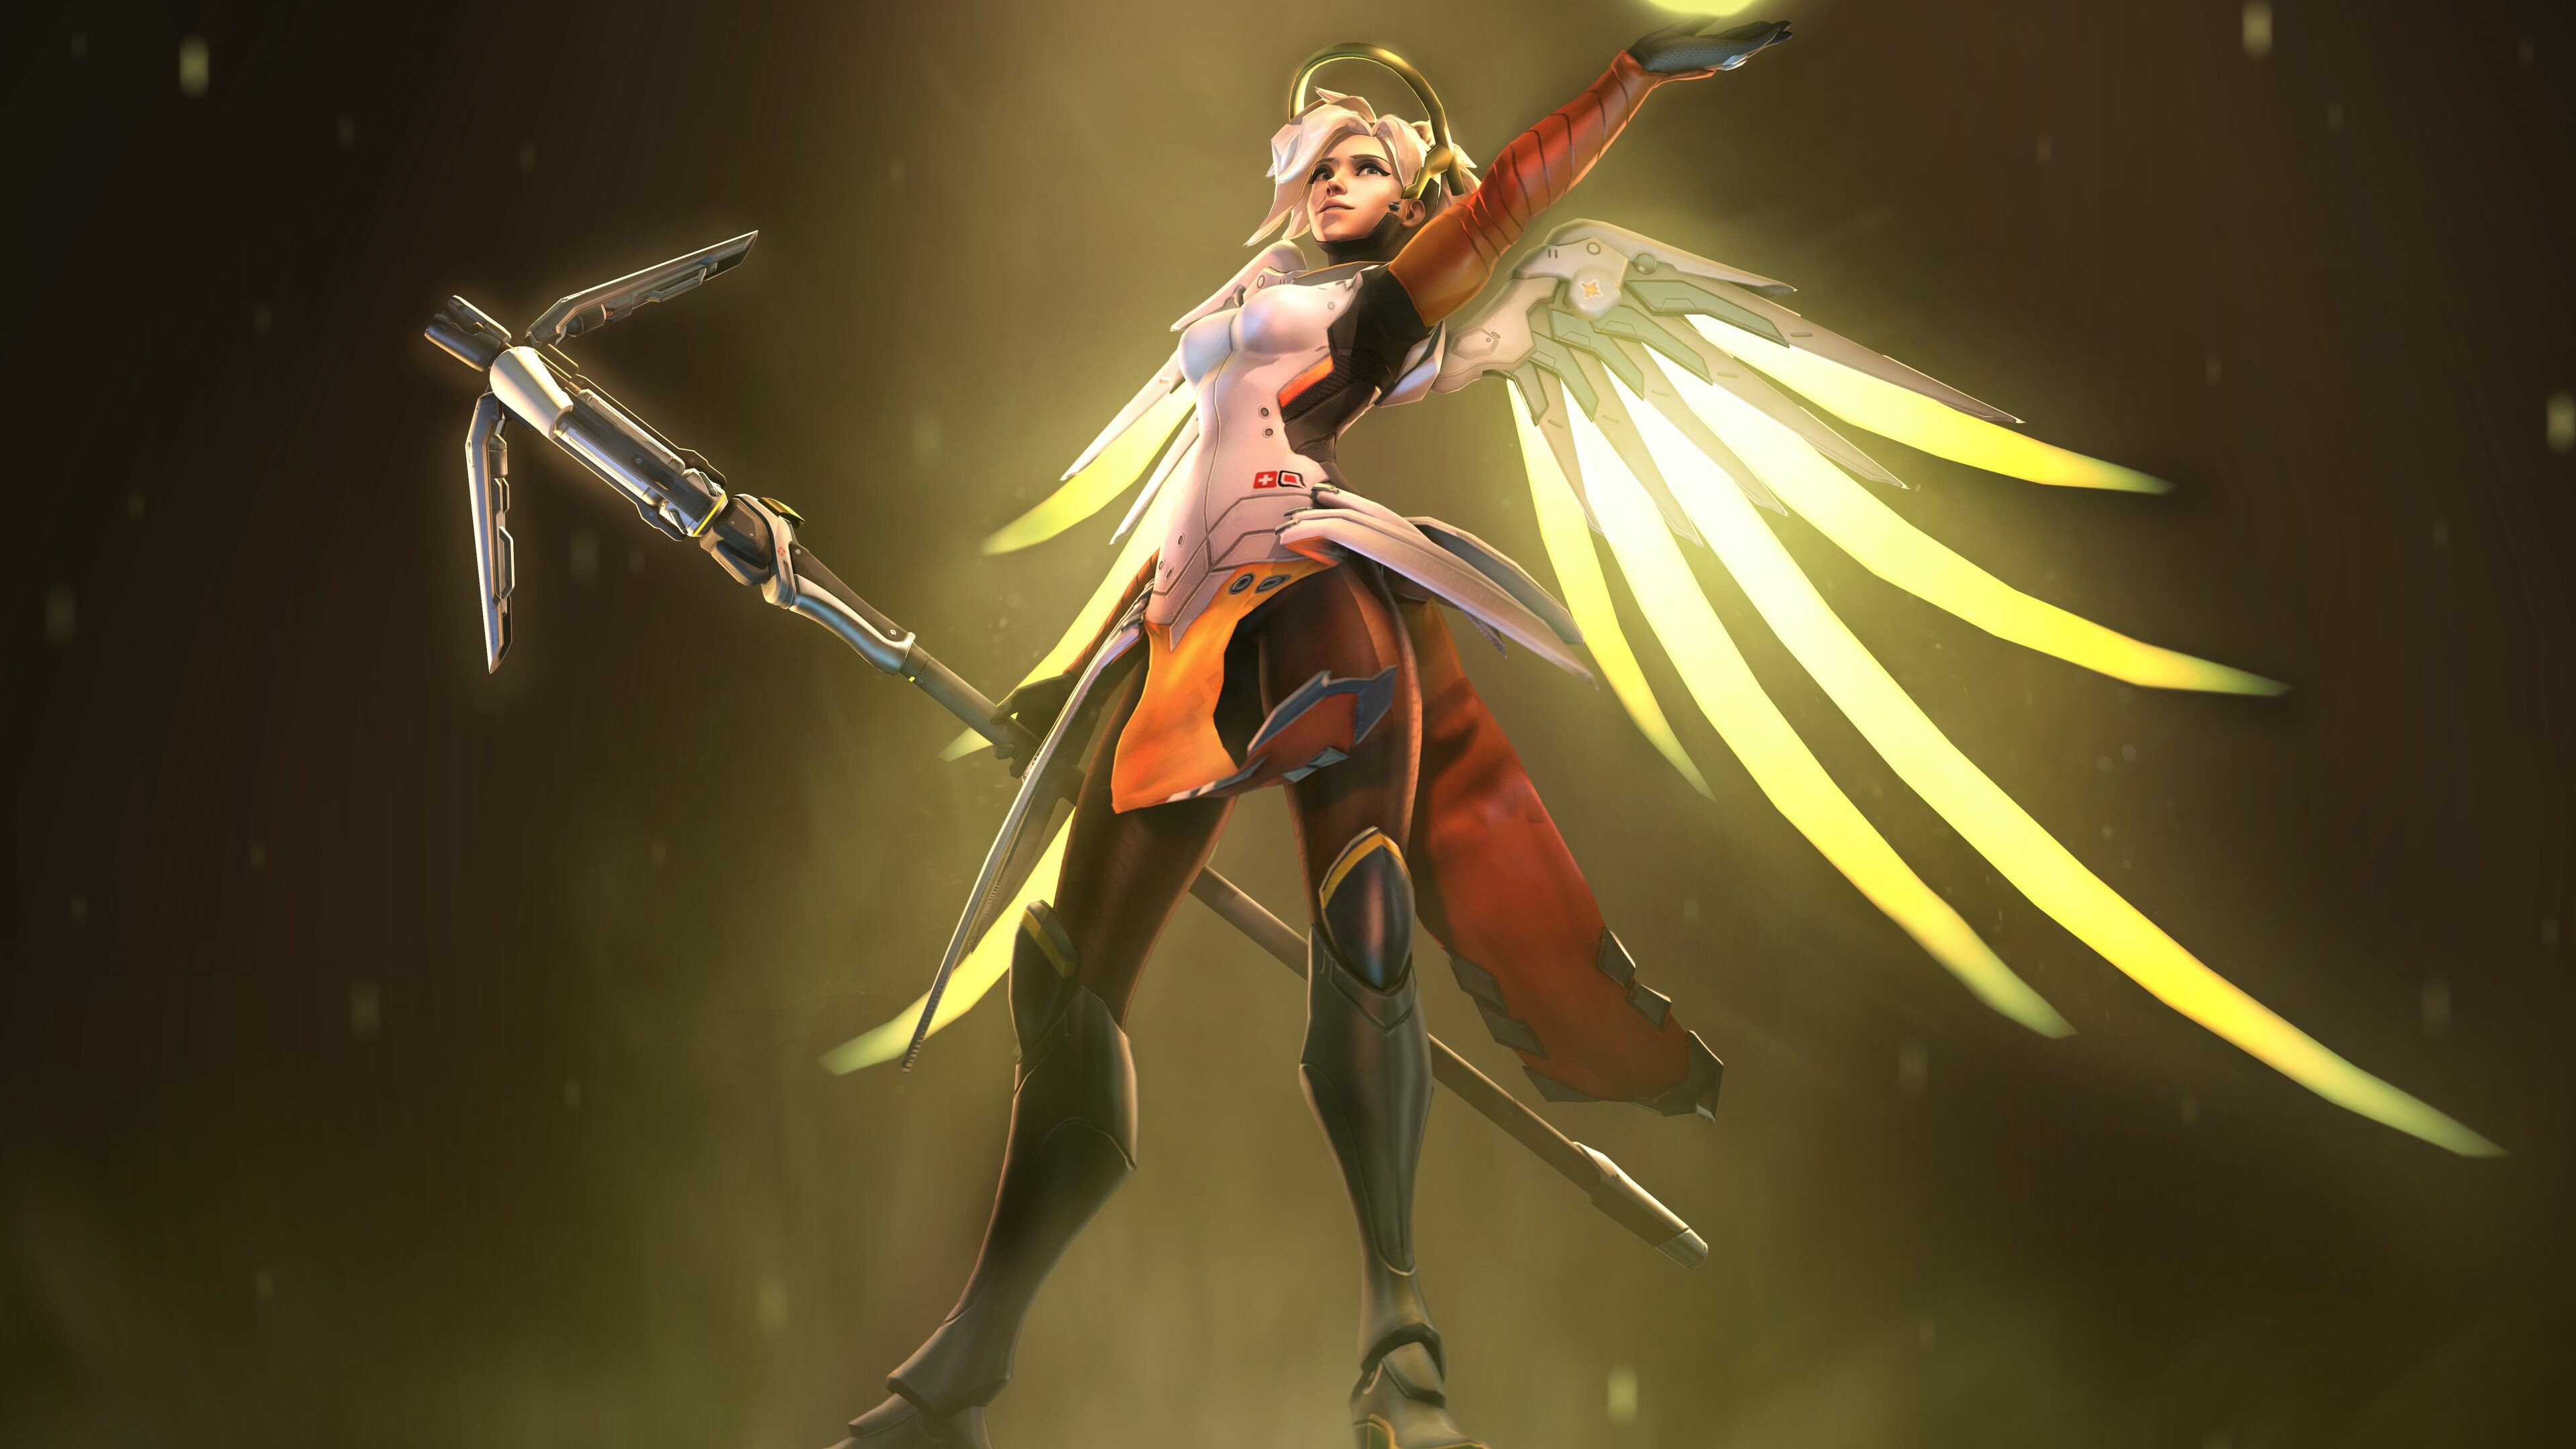 Overwatch: Mercy, The most healing-oriented of the Support heroes. 3840x2160 4K Wallpaper.